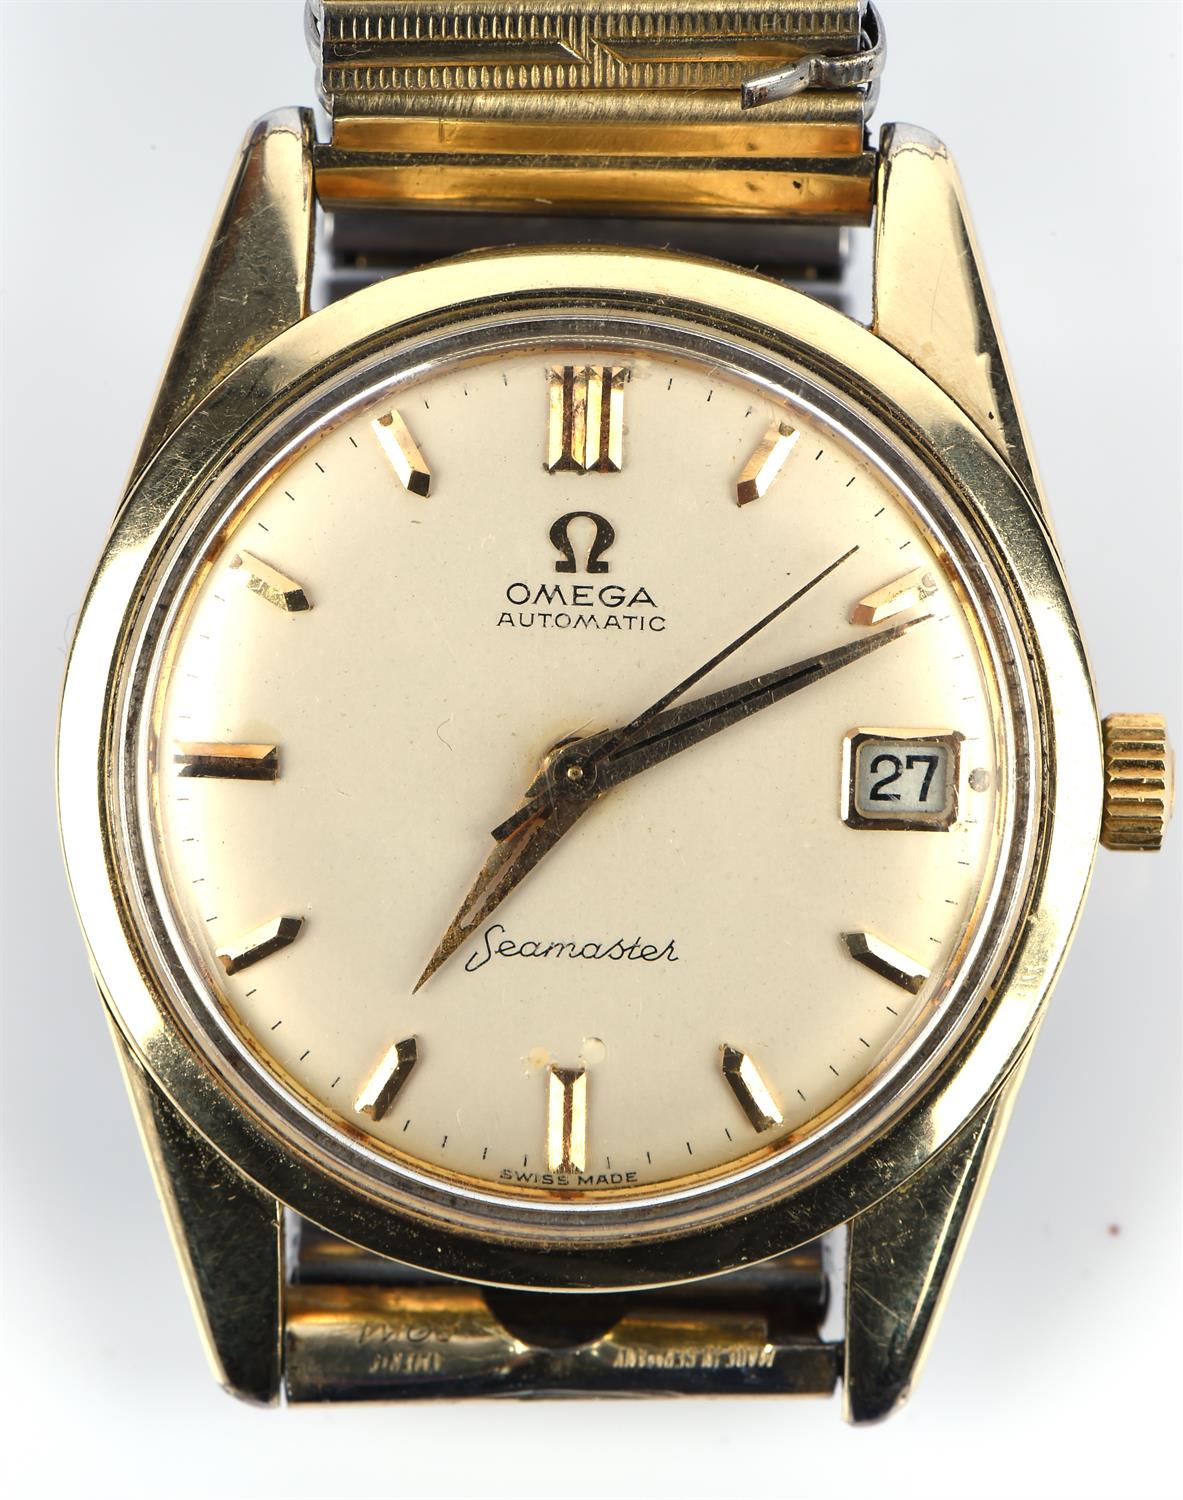 Omega A Reference 147-01 Gentleman's gold plated Seamaster wristwatch, the signed silvered dial